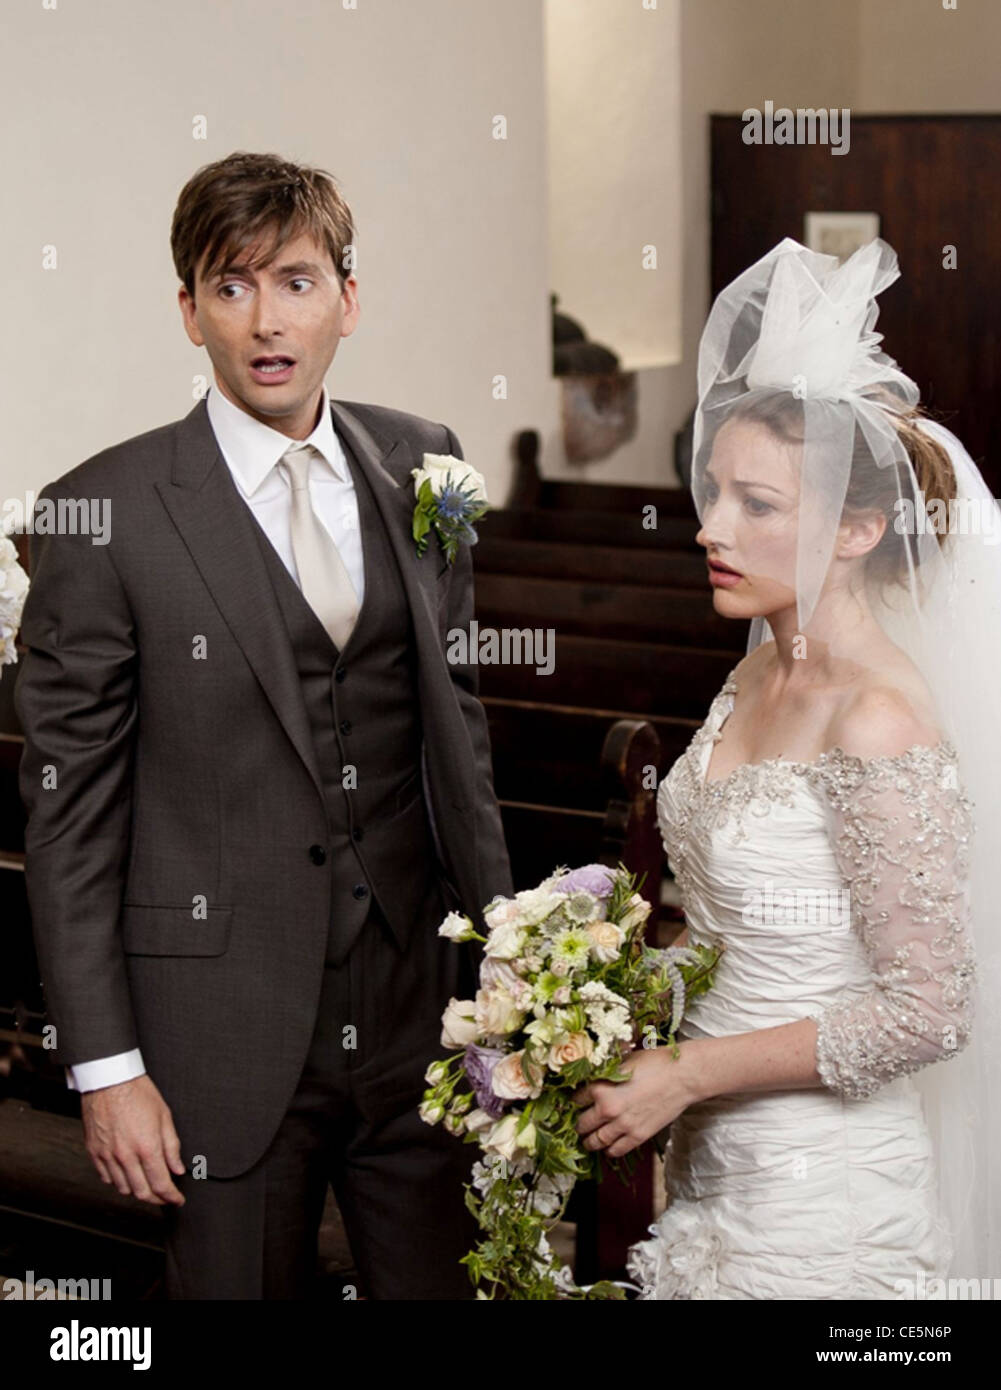 THE DECOY BRIDE 2011 IFC Films release with David Tennant as James and Kelly MacDonald as Katie Stock Photo